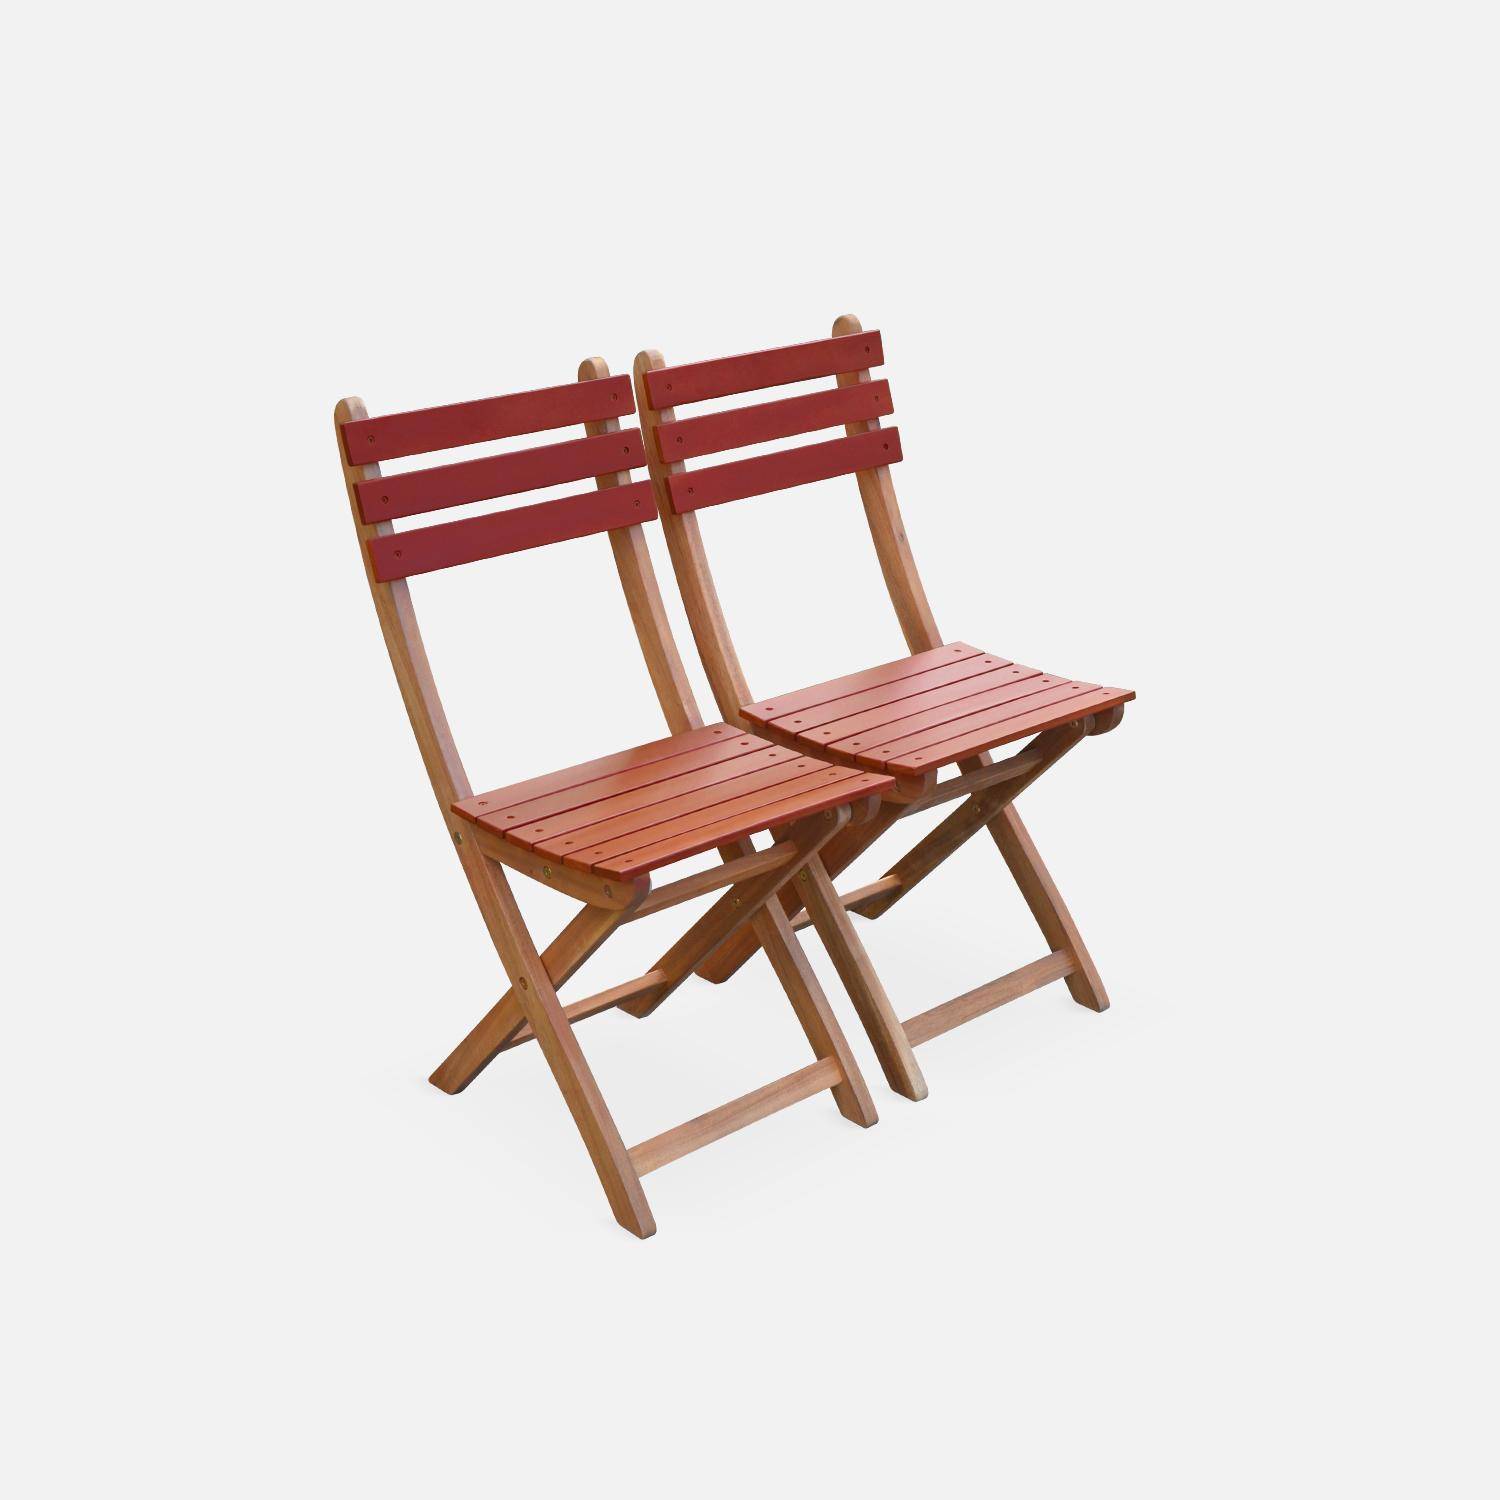 2-seater foldable wooden bistro garden table with chairs, 60x60cm - Barcelona - Terracotta,sweeek,Photo5